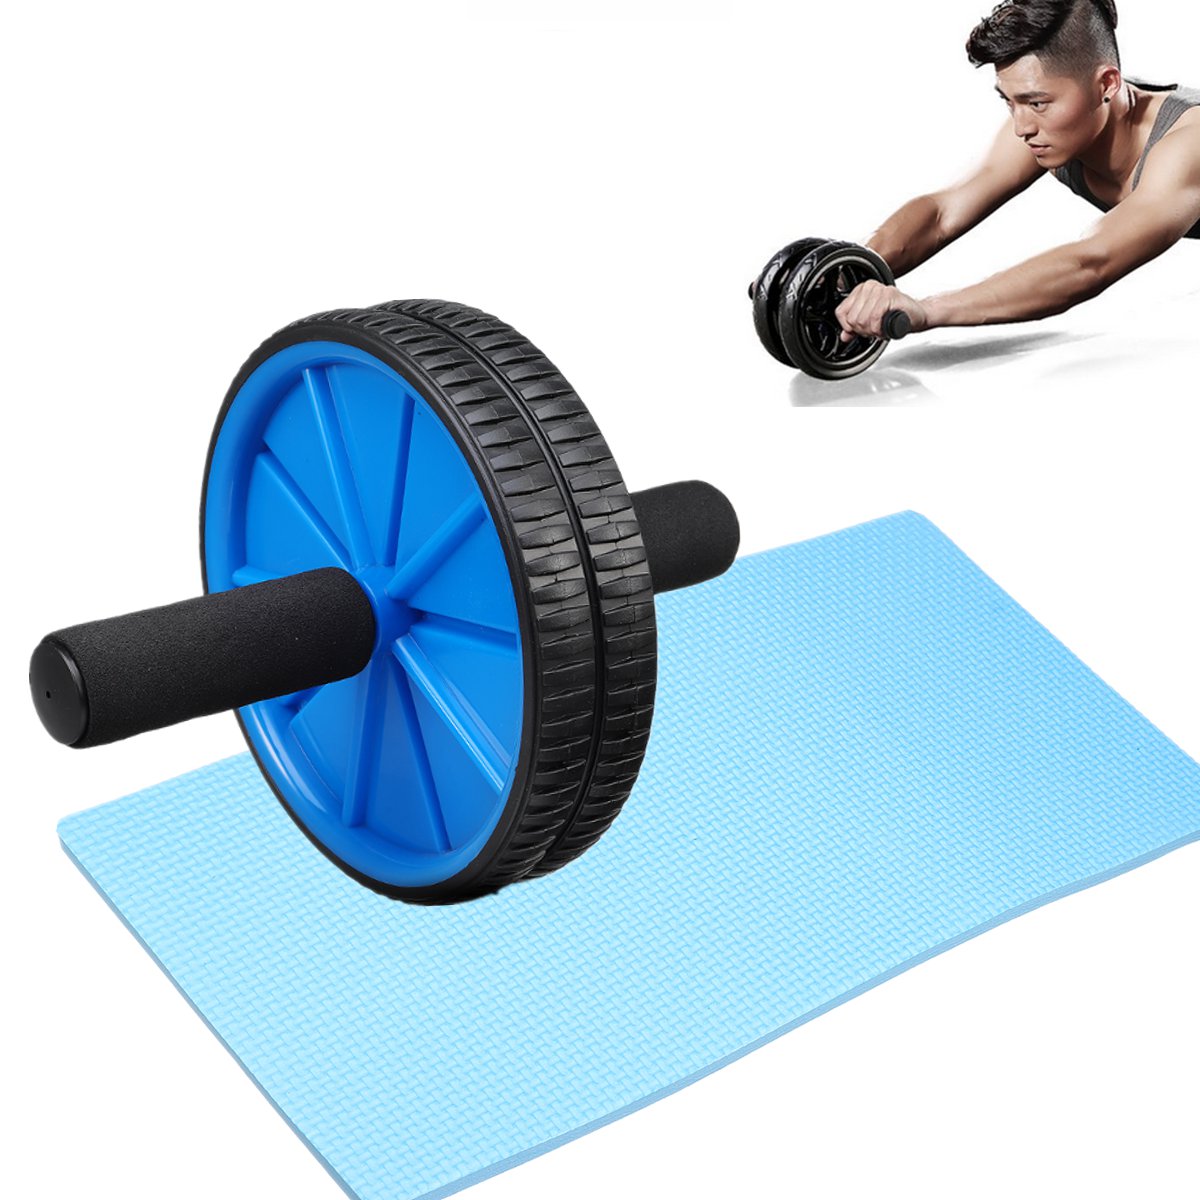 Body-Fitness-Dual-Wheel-Abdominal-Training-roller-Home-Gym-Arm-Waist-Exerciser-Gym-Exercise-Tools-1464492